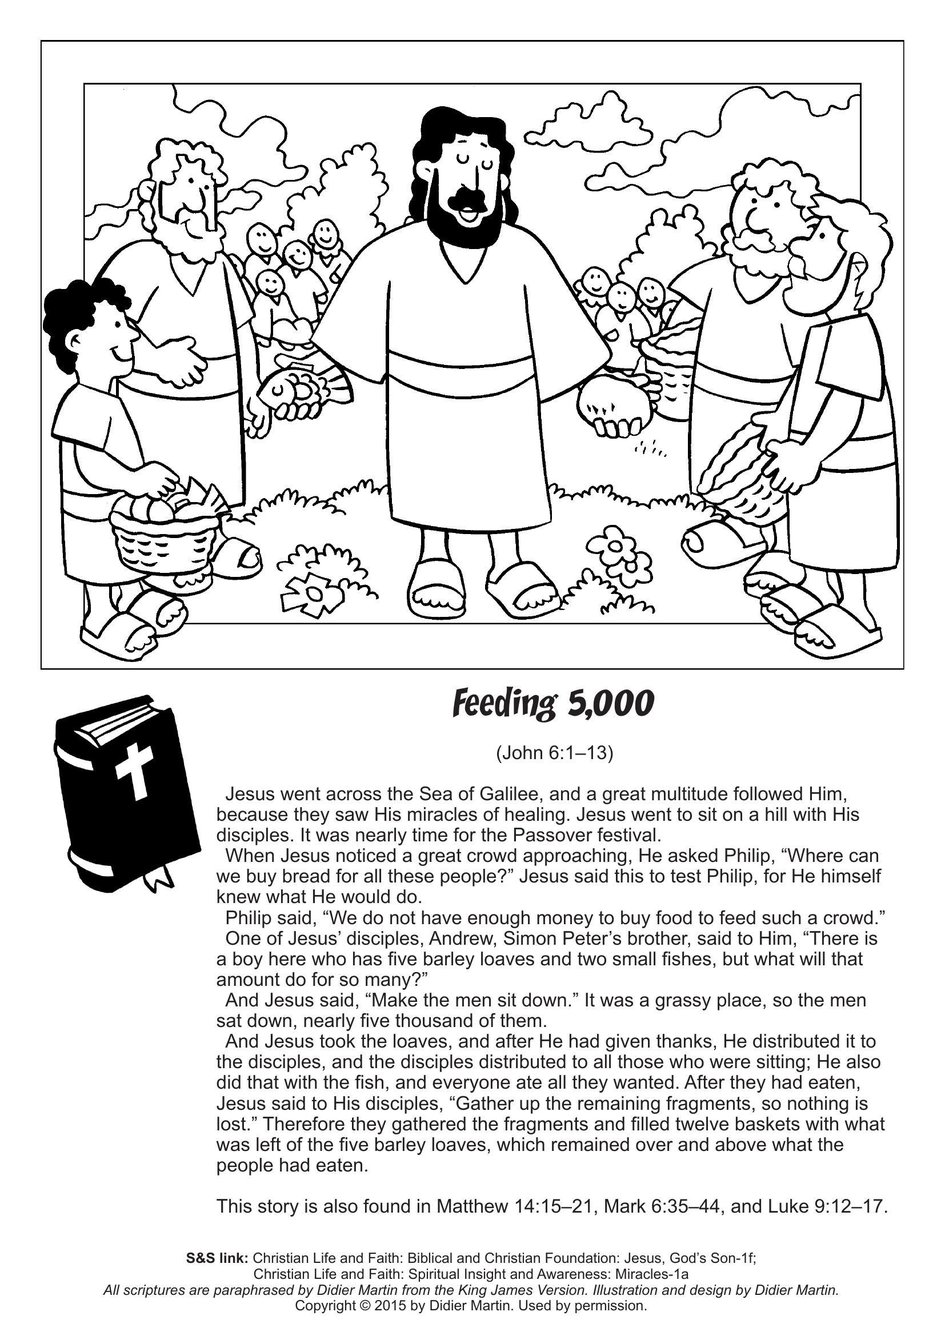 king of the hill coloring pages